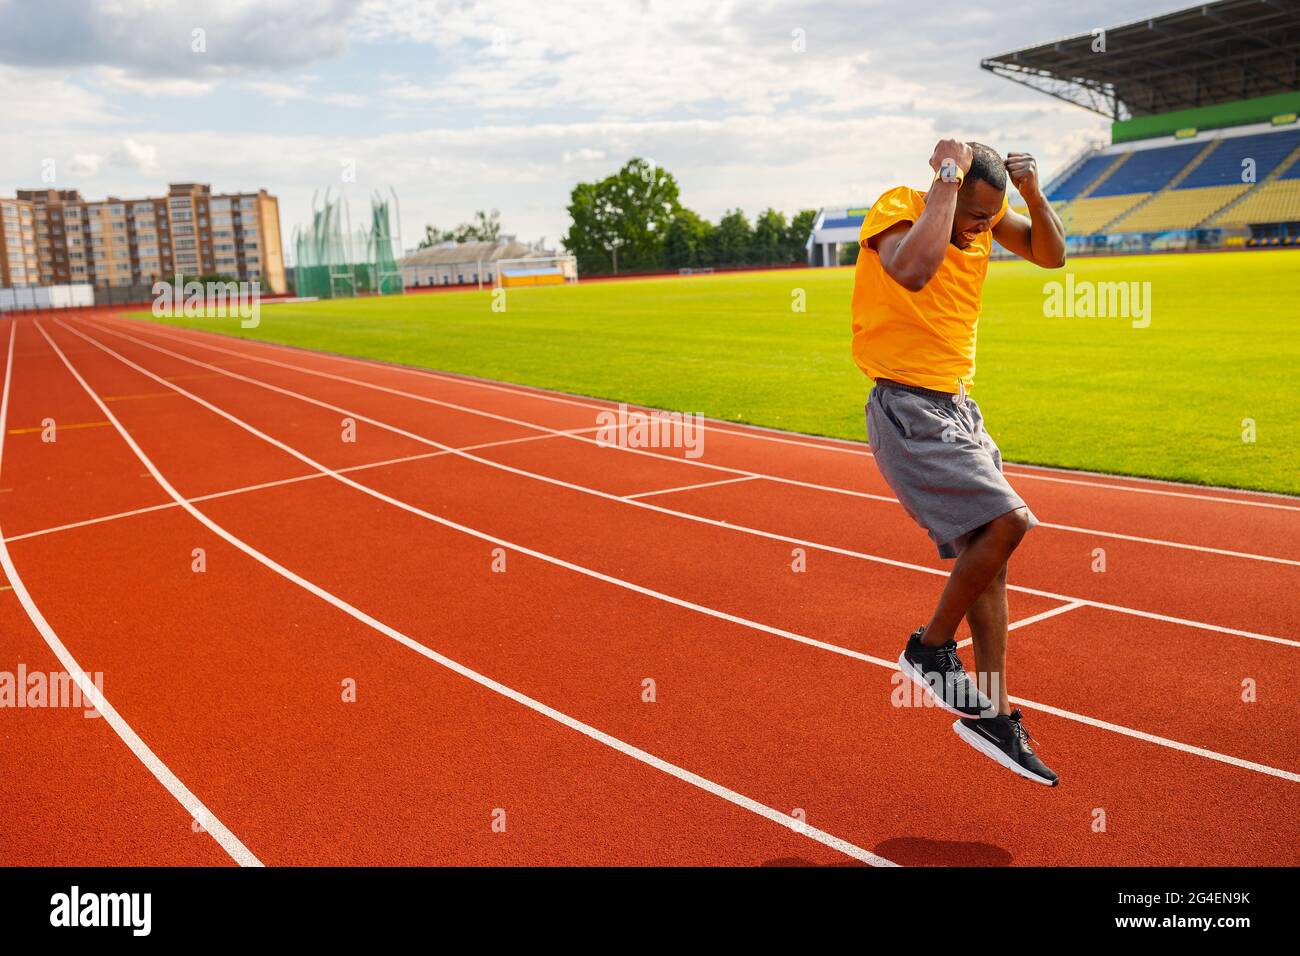 Joyful Afro American runner in yellow sportswear happily jumping and winning the runner competition, receiving first place, training and working hard Stock Photo